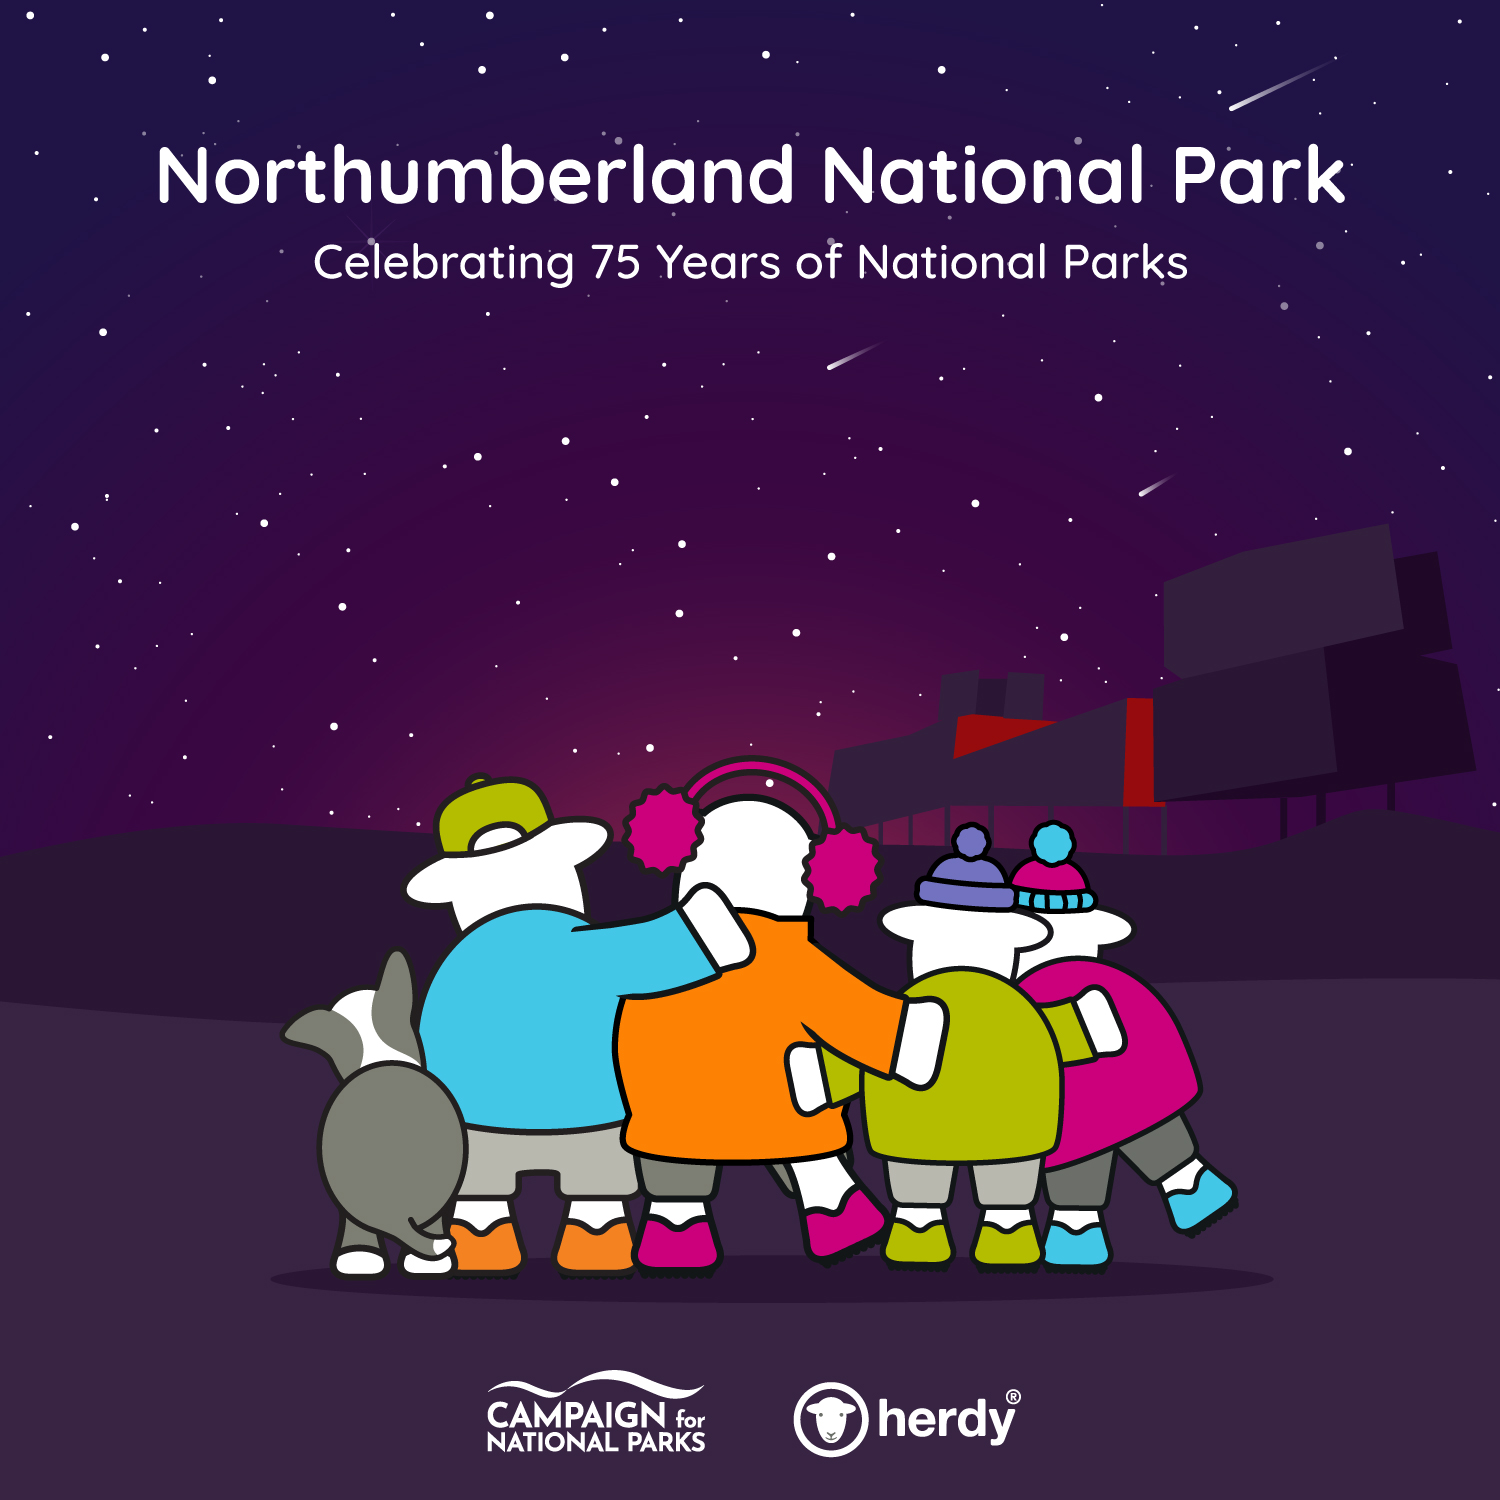 herdy in the Northumberland National Park, celebrating 75 years of National Parks